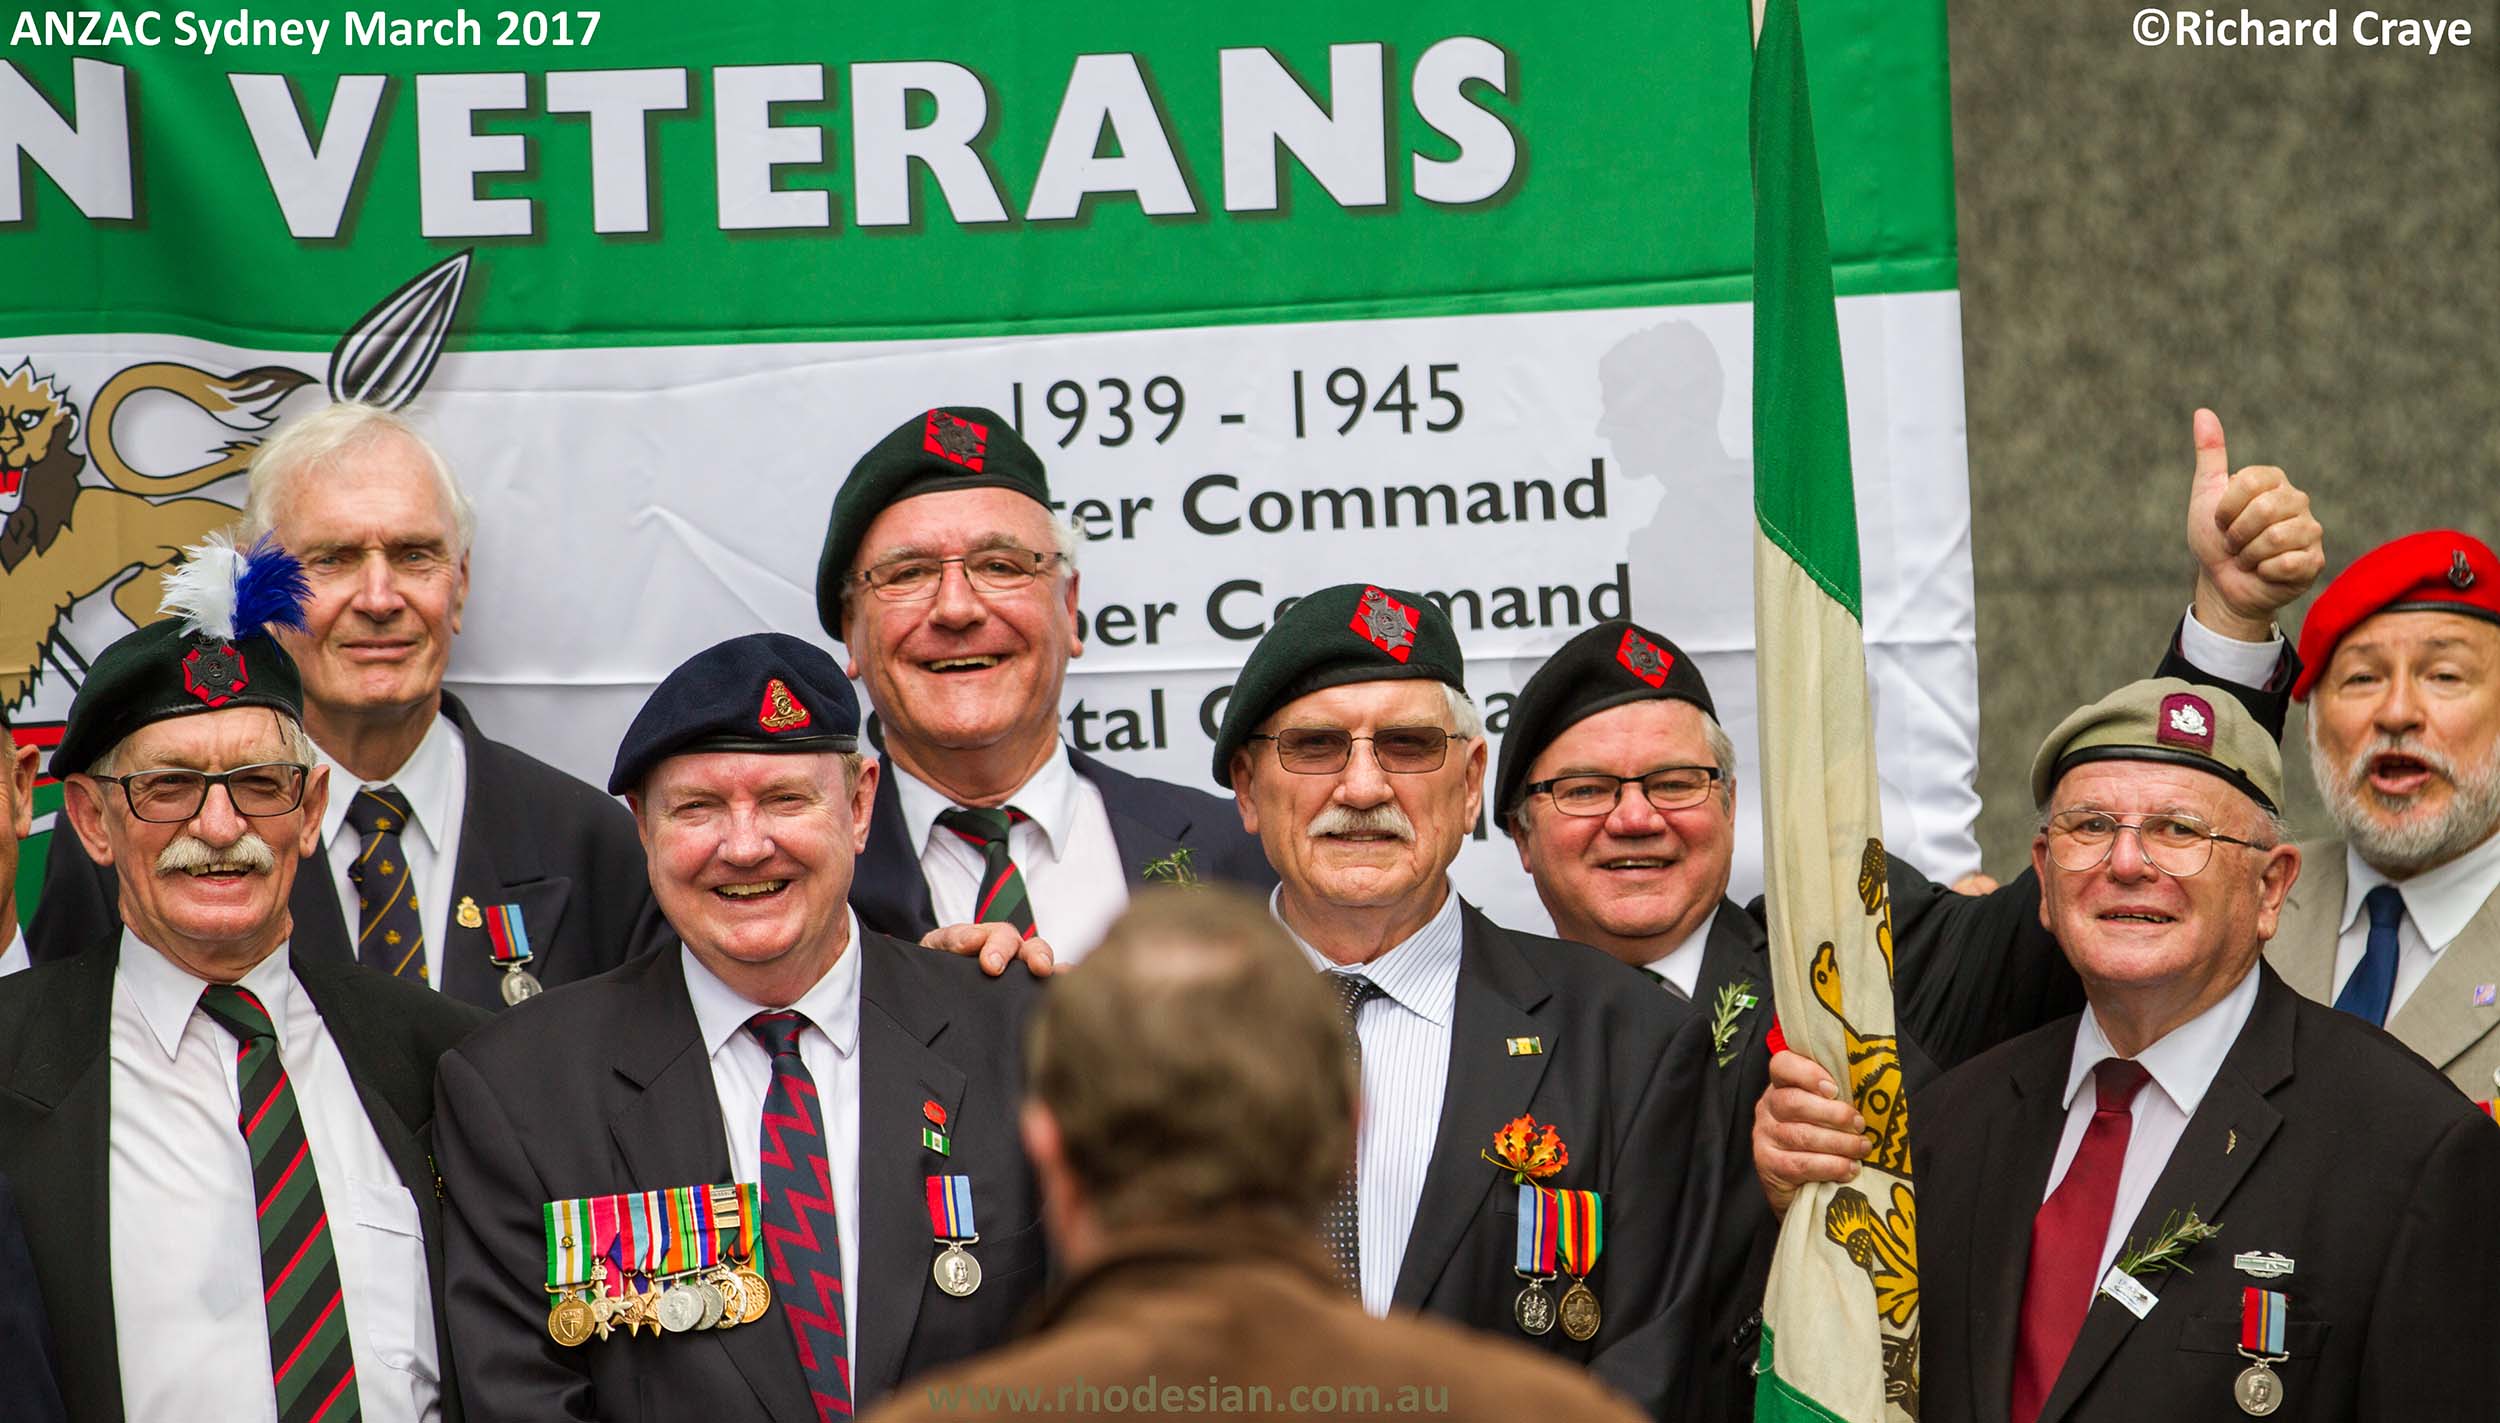 Some of the Rhodesian veterans after ANZAC Day March in Sydney in 2017 posted on www.rhodesian.com.au